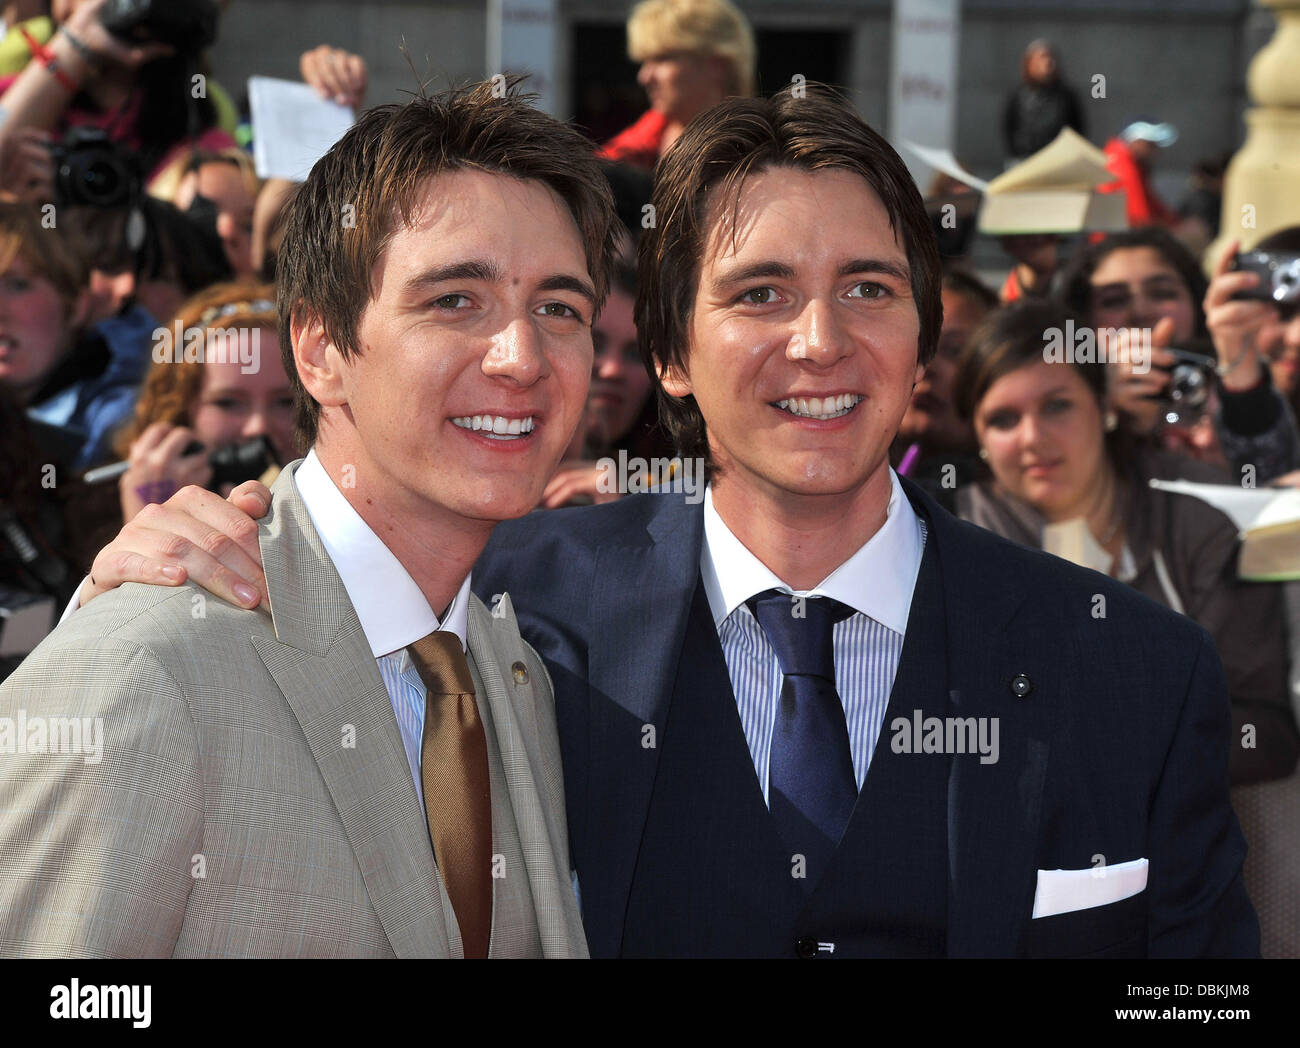 James and Oliver Phelps Harry Potter And The Deathly Hallows: Part 2 -  world film premiere held on Trafalgar Square - Arrivals. London, England -  07.07.11 Stock Photo - Alamy